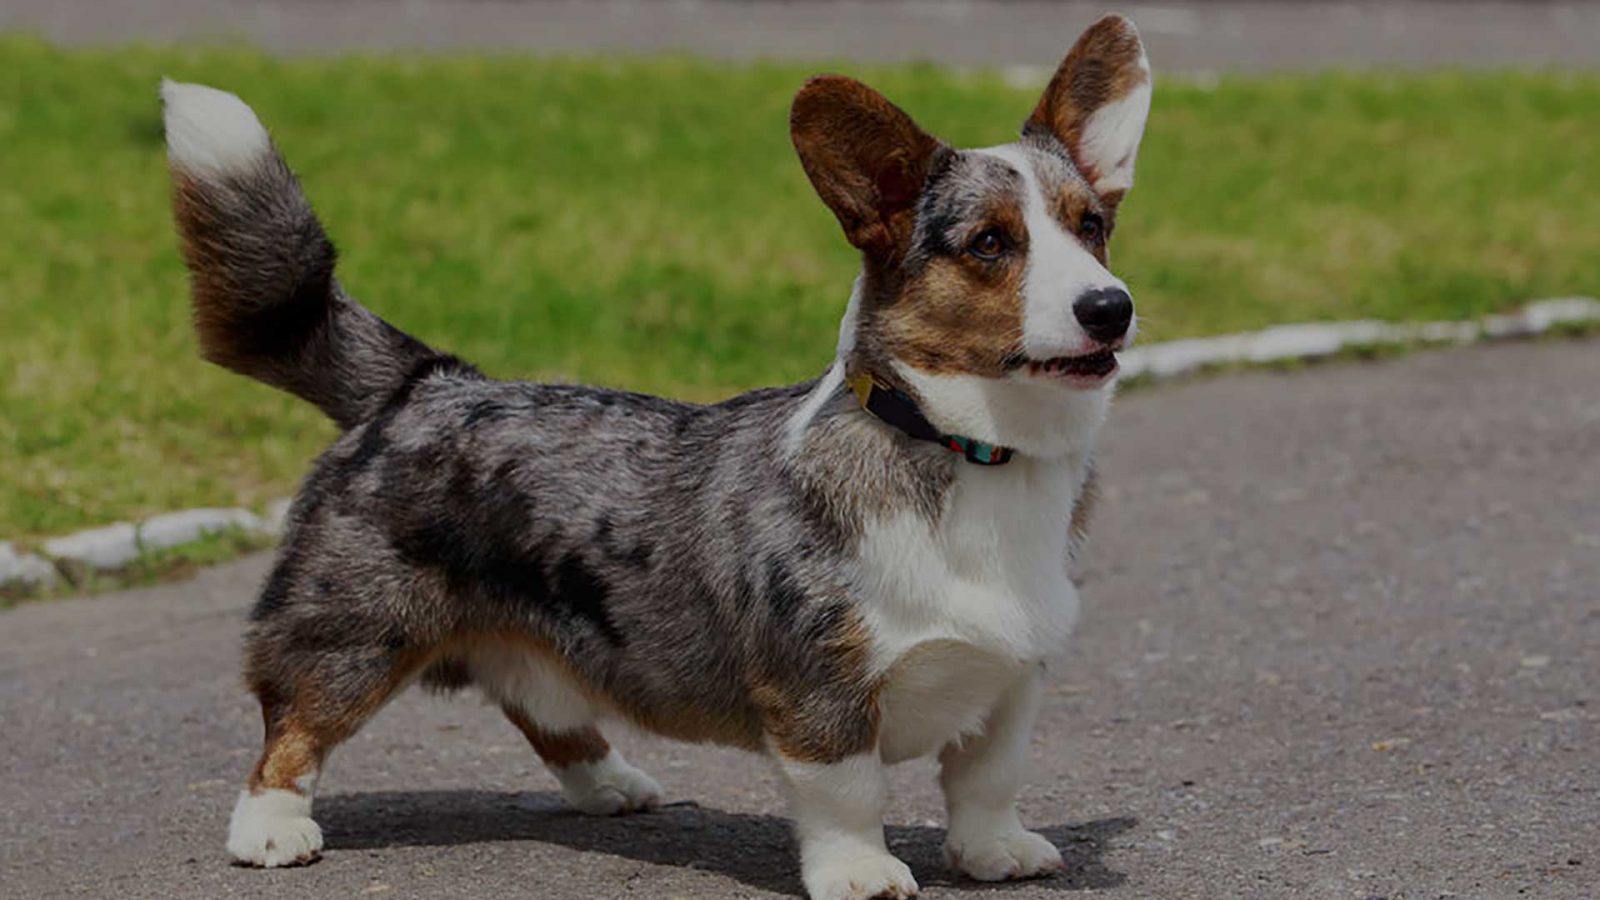 Learn About The Cardigan Welsh Corgi Dog Breed From A Trusted